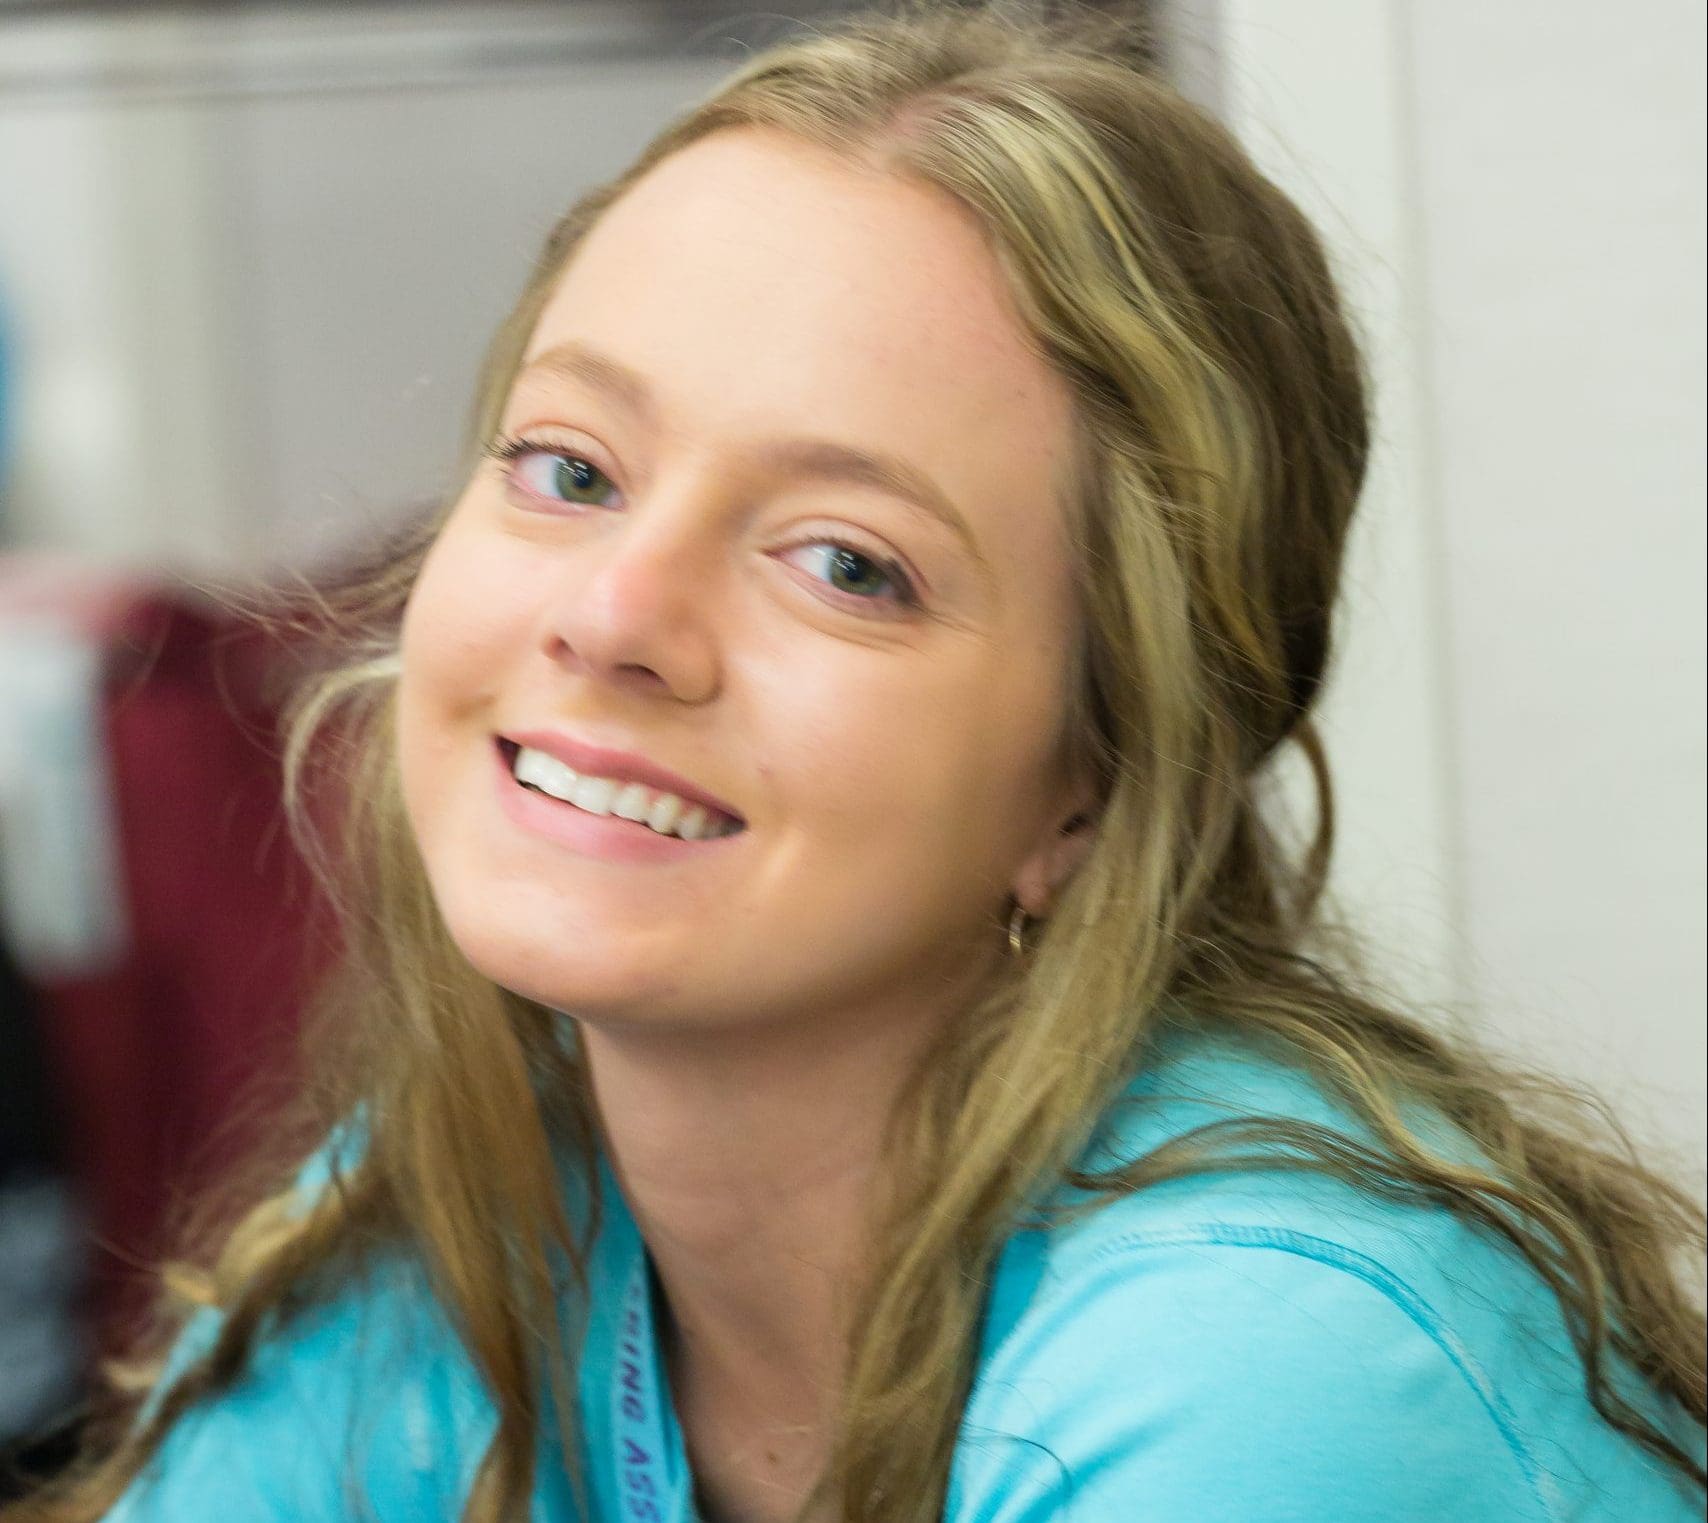 A portrait of a smiling woman with blue eyes and blonde hair, wearing a turquoise "Back to School" shirt, inside a room.